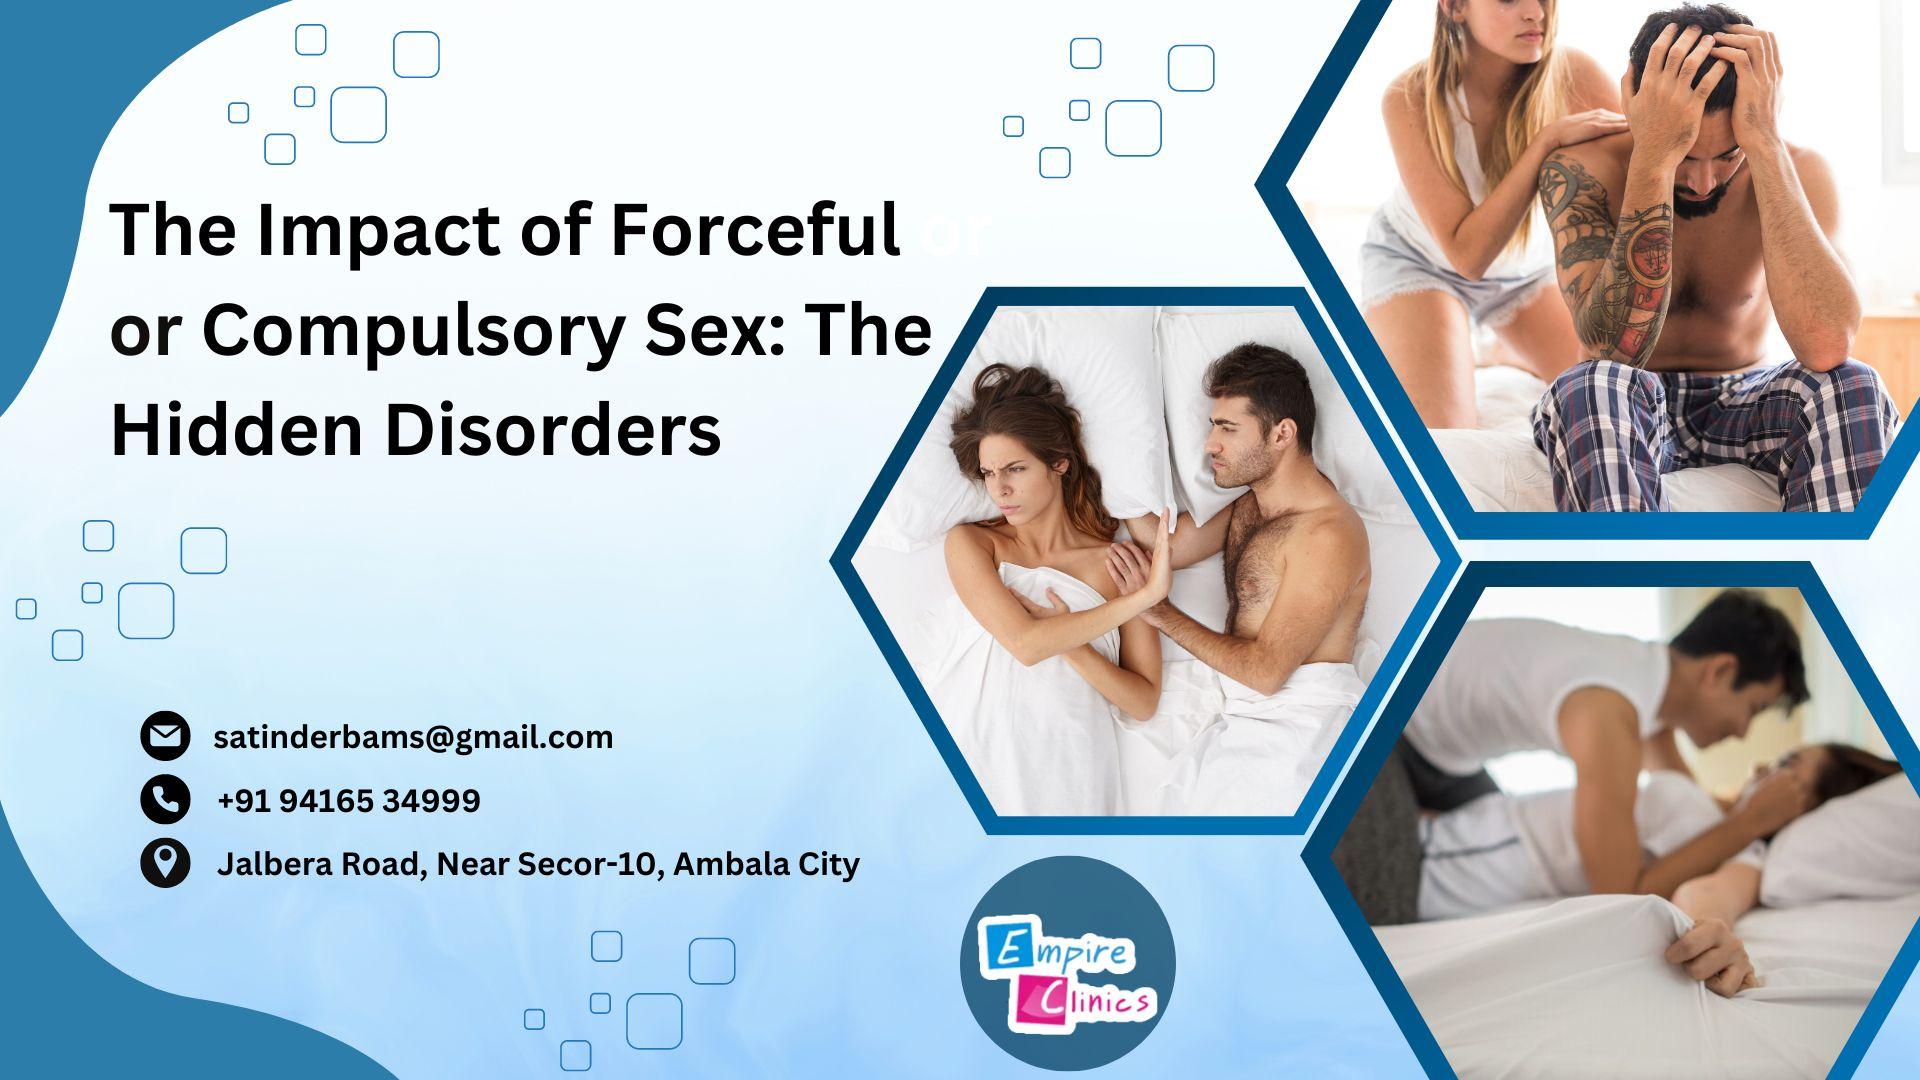 The Impact of Forceful or Compulsory Sex: The Hidden Disorders